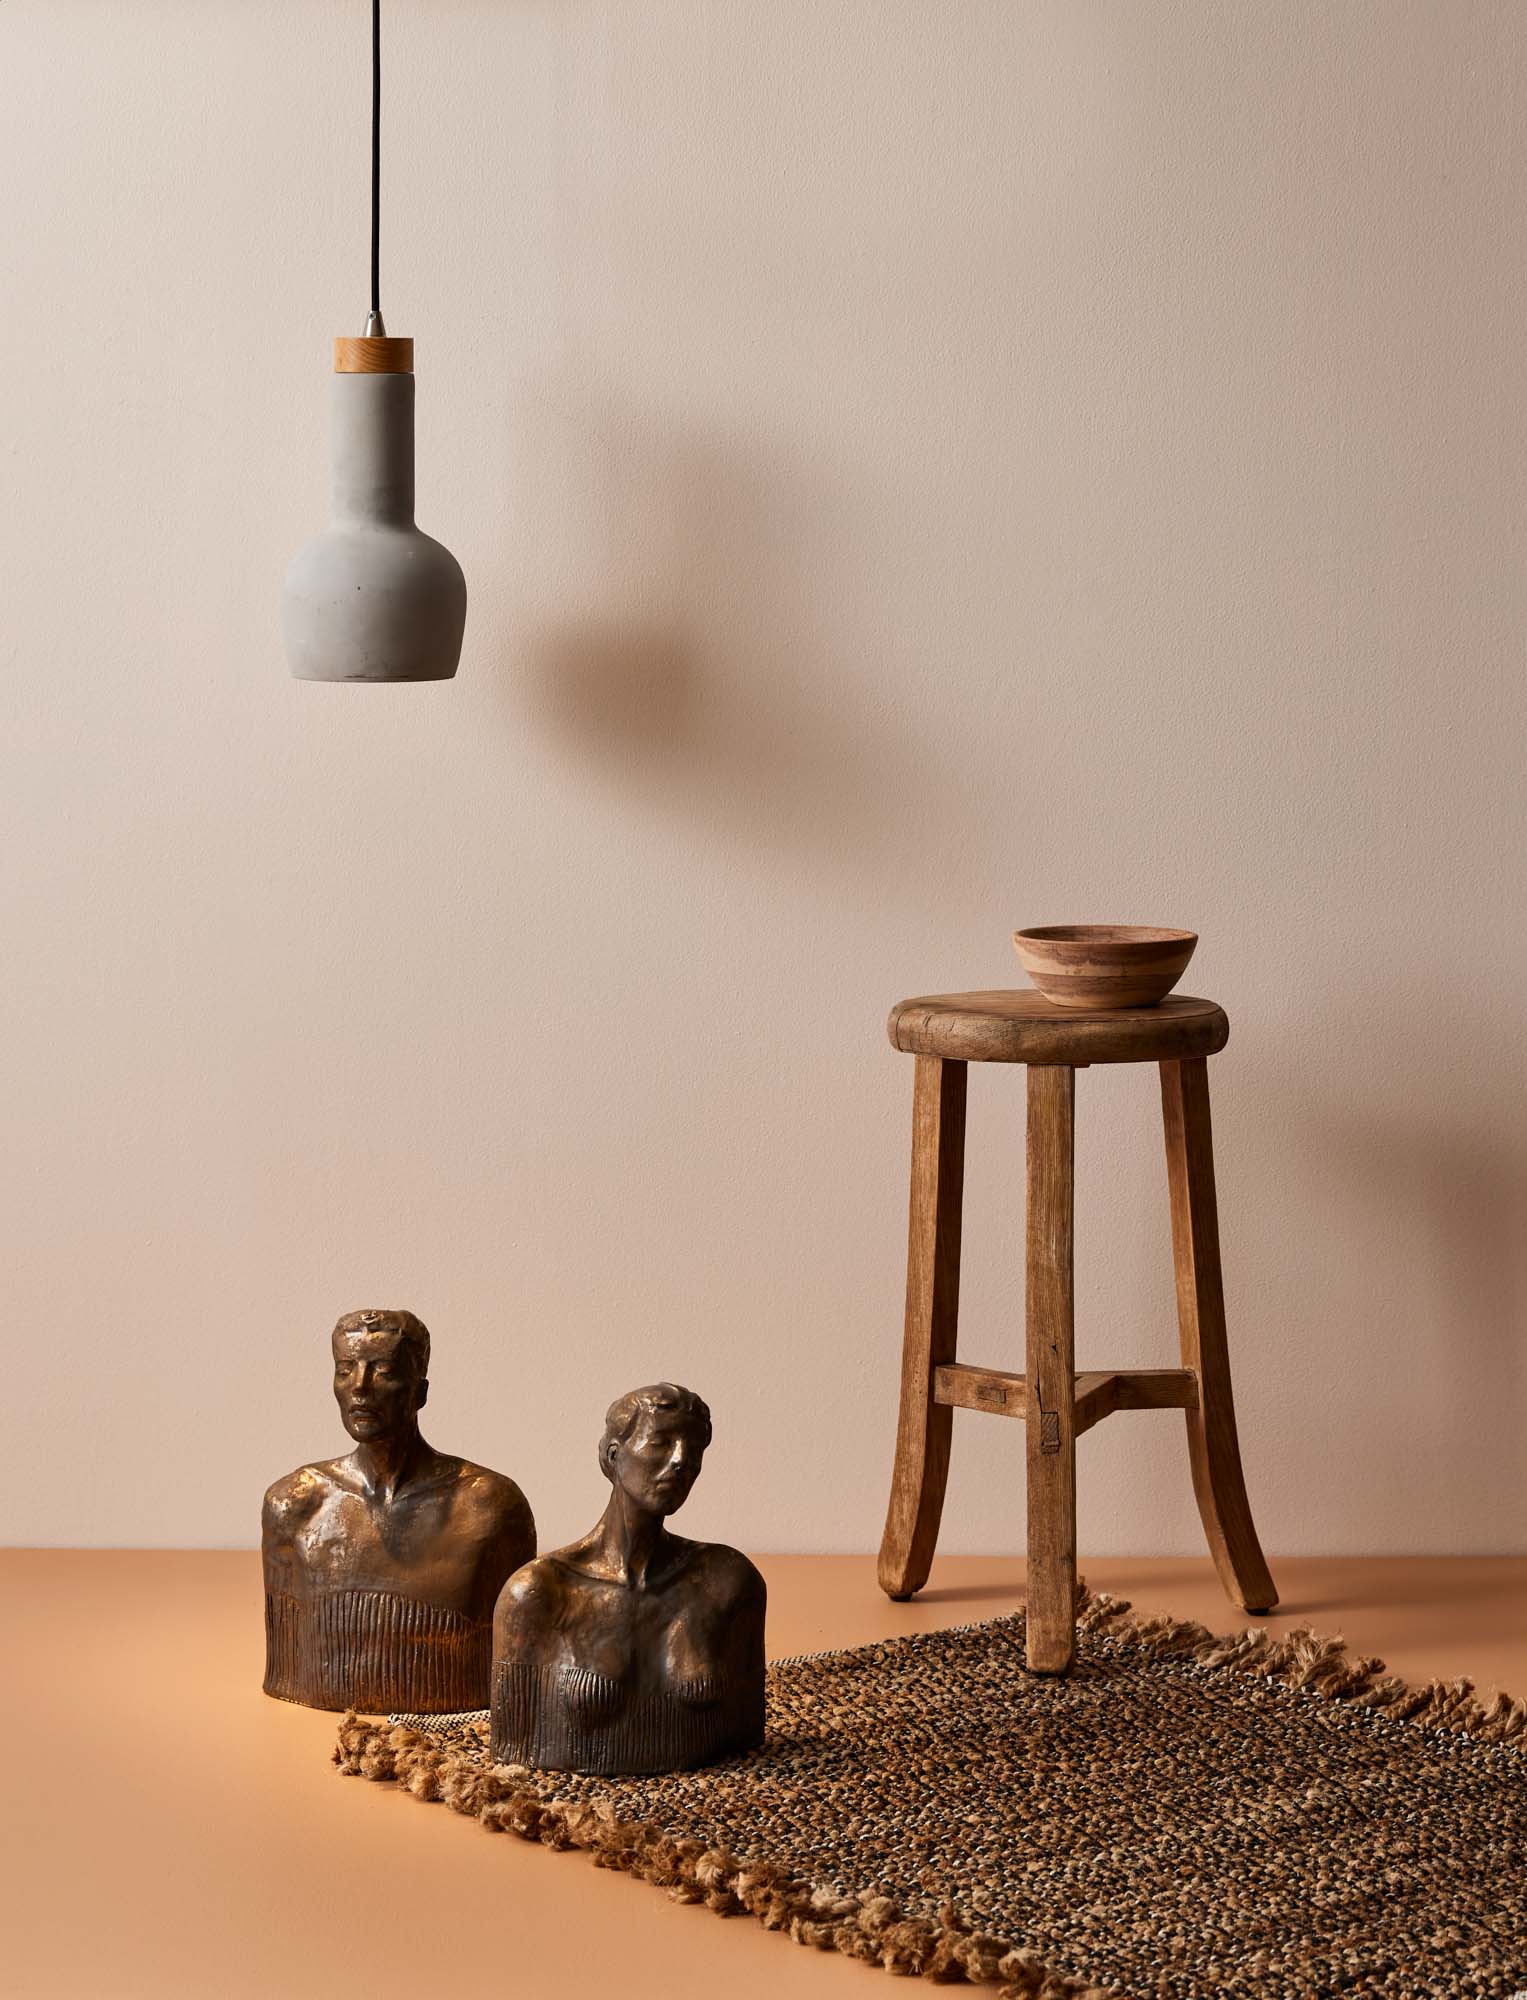 Image with beige wall and floor, a wooden stool with a bowl sitting on the stool, there is a jute rug on the floor and wooden bust statues on the rug